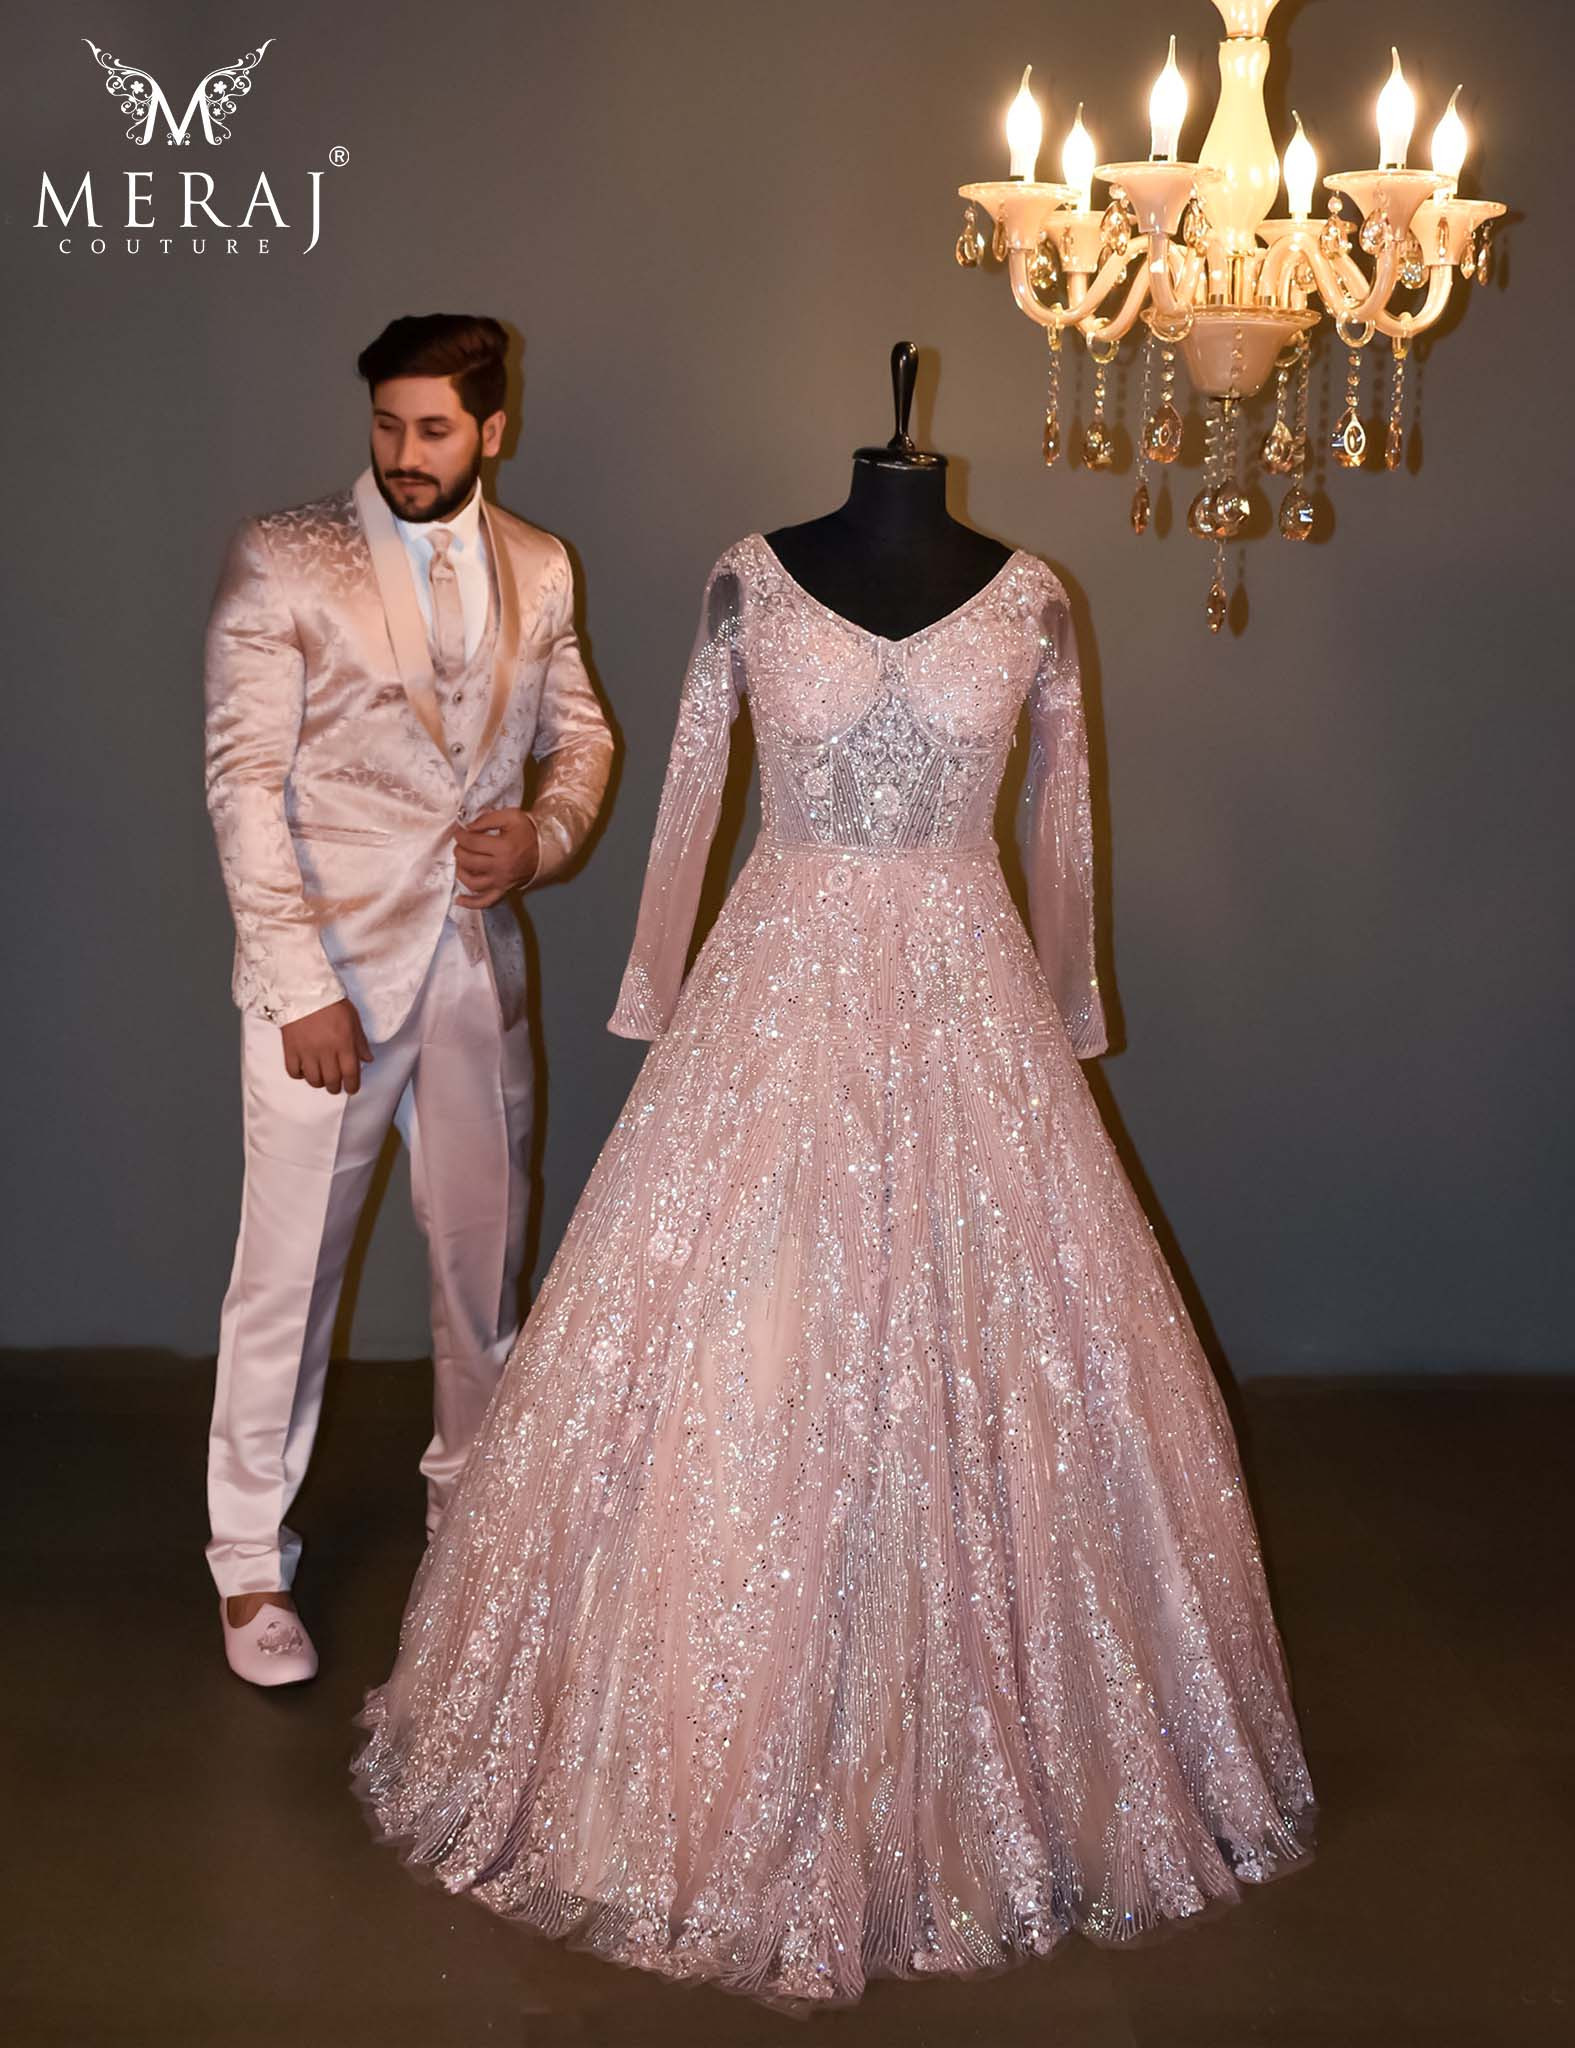  Soft Peach Bridal Gown With Exquisite Italian Jacquard Suit.